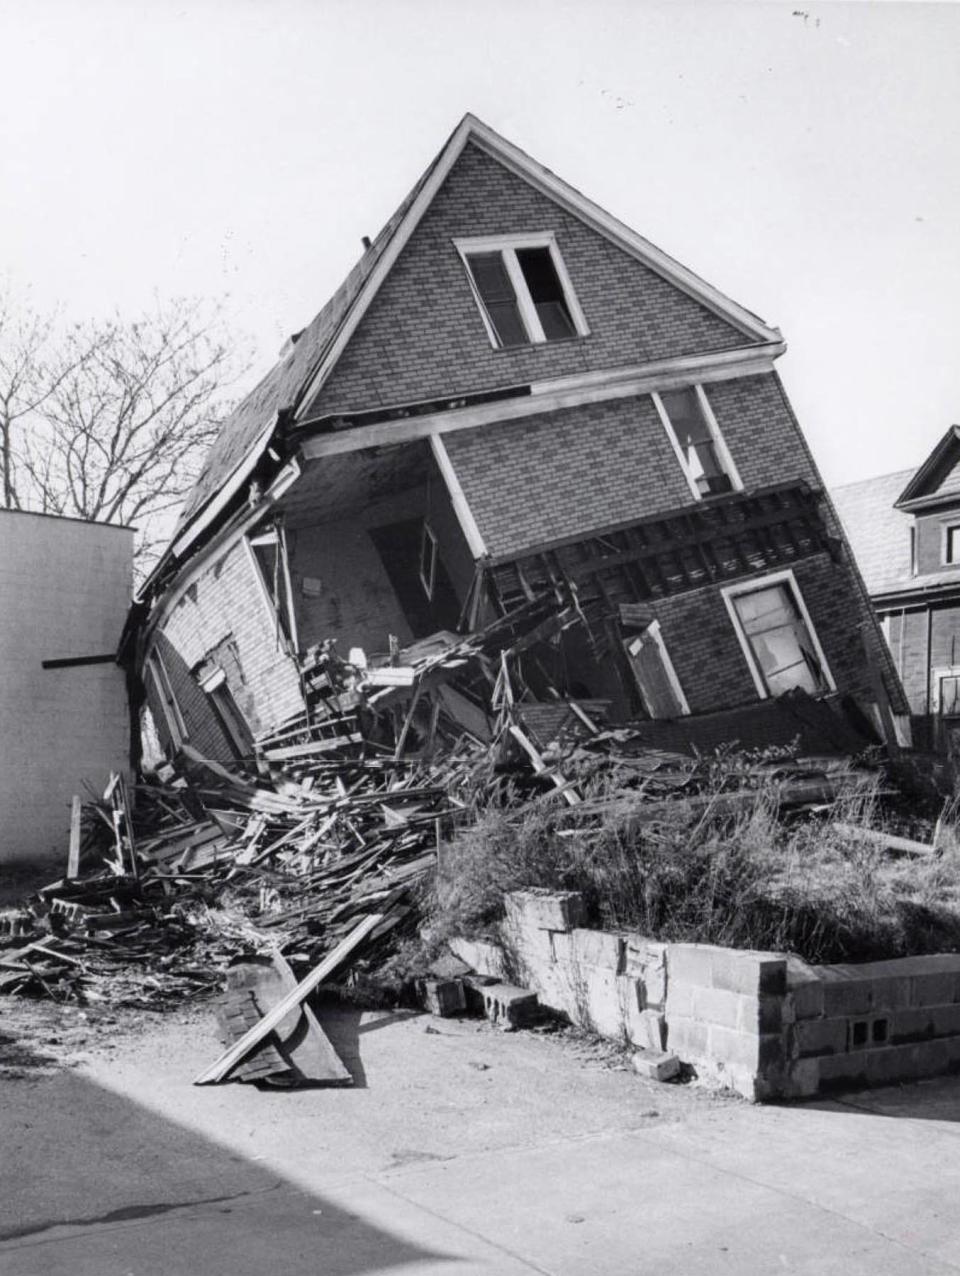 This house at 280 W. Exchange St. in Akron was demolished in 1969 to make way for the Innerbelt.